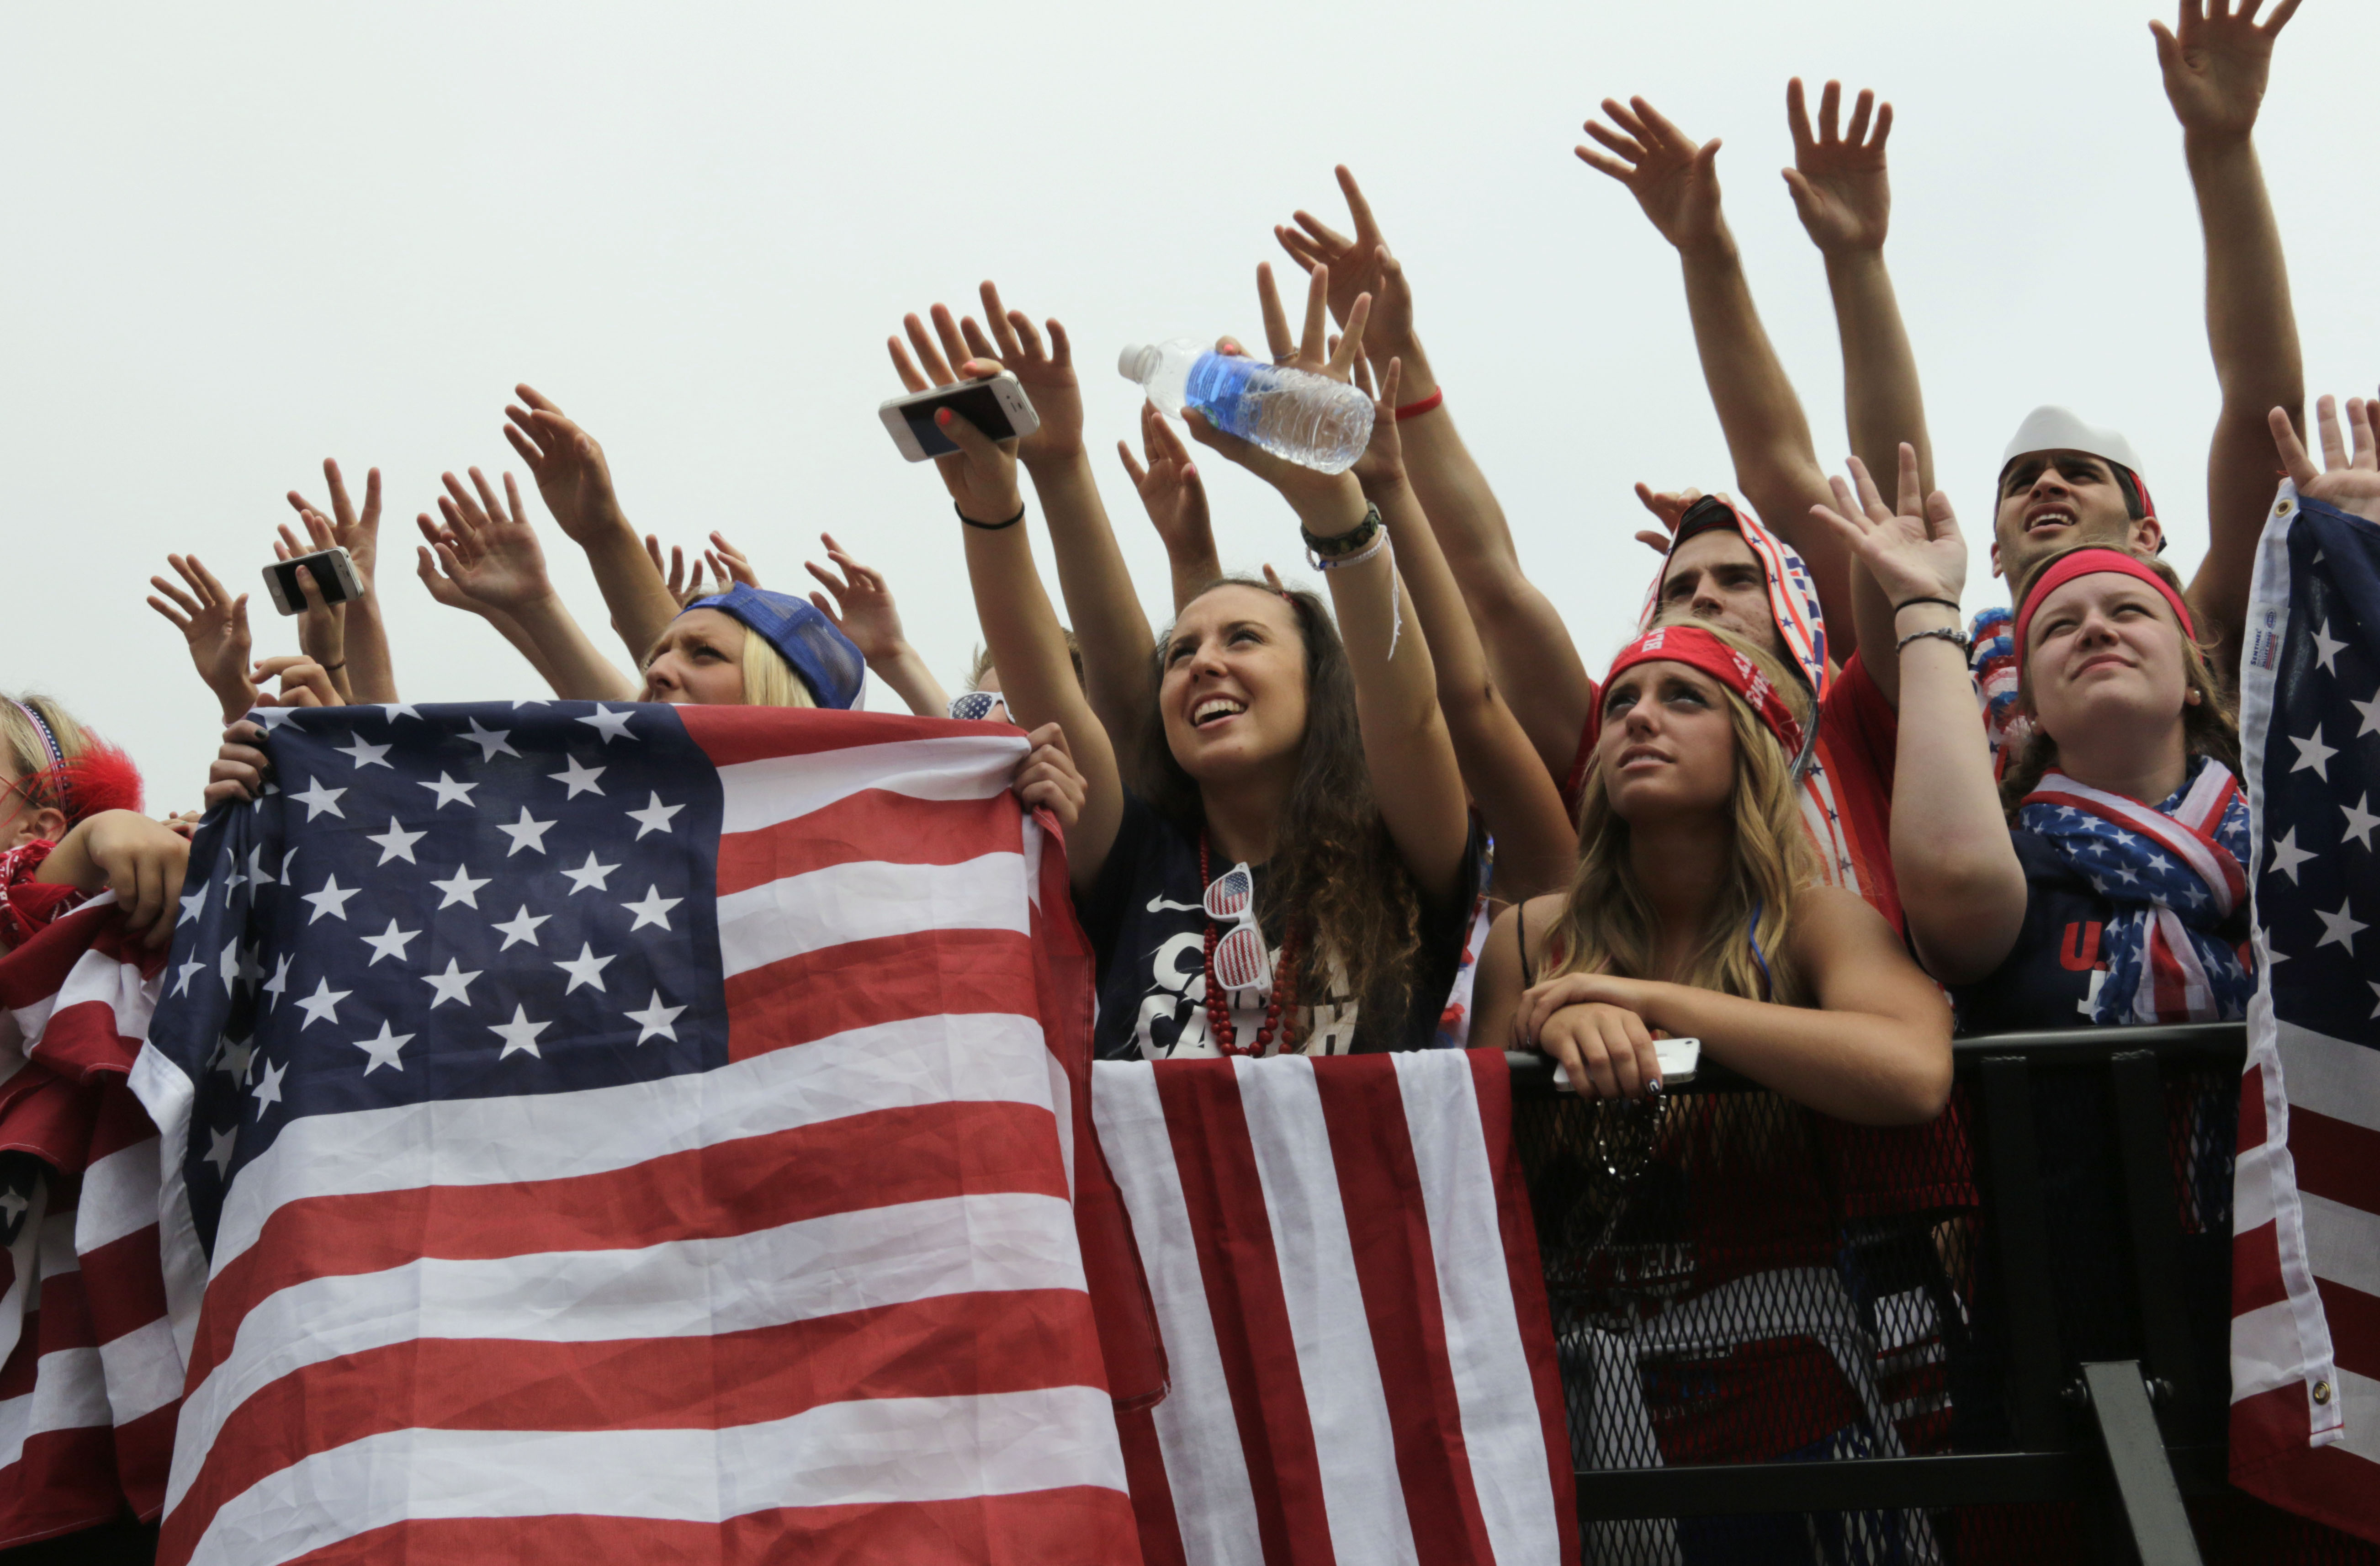 World Cup 2014: Fans unite for mass viewings across the U.S. - CBS News